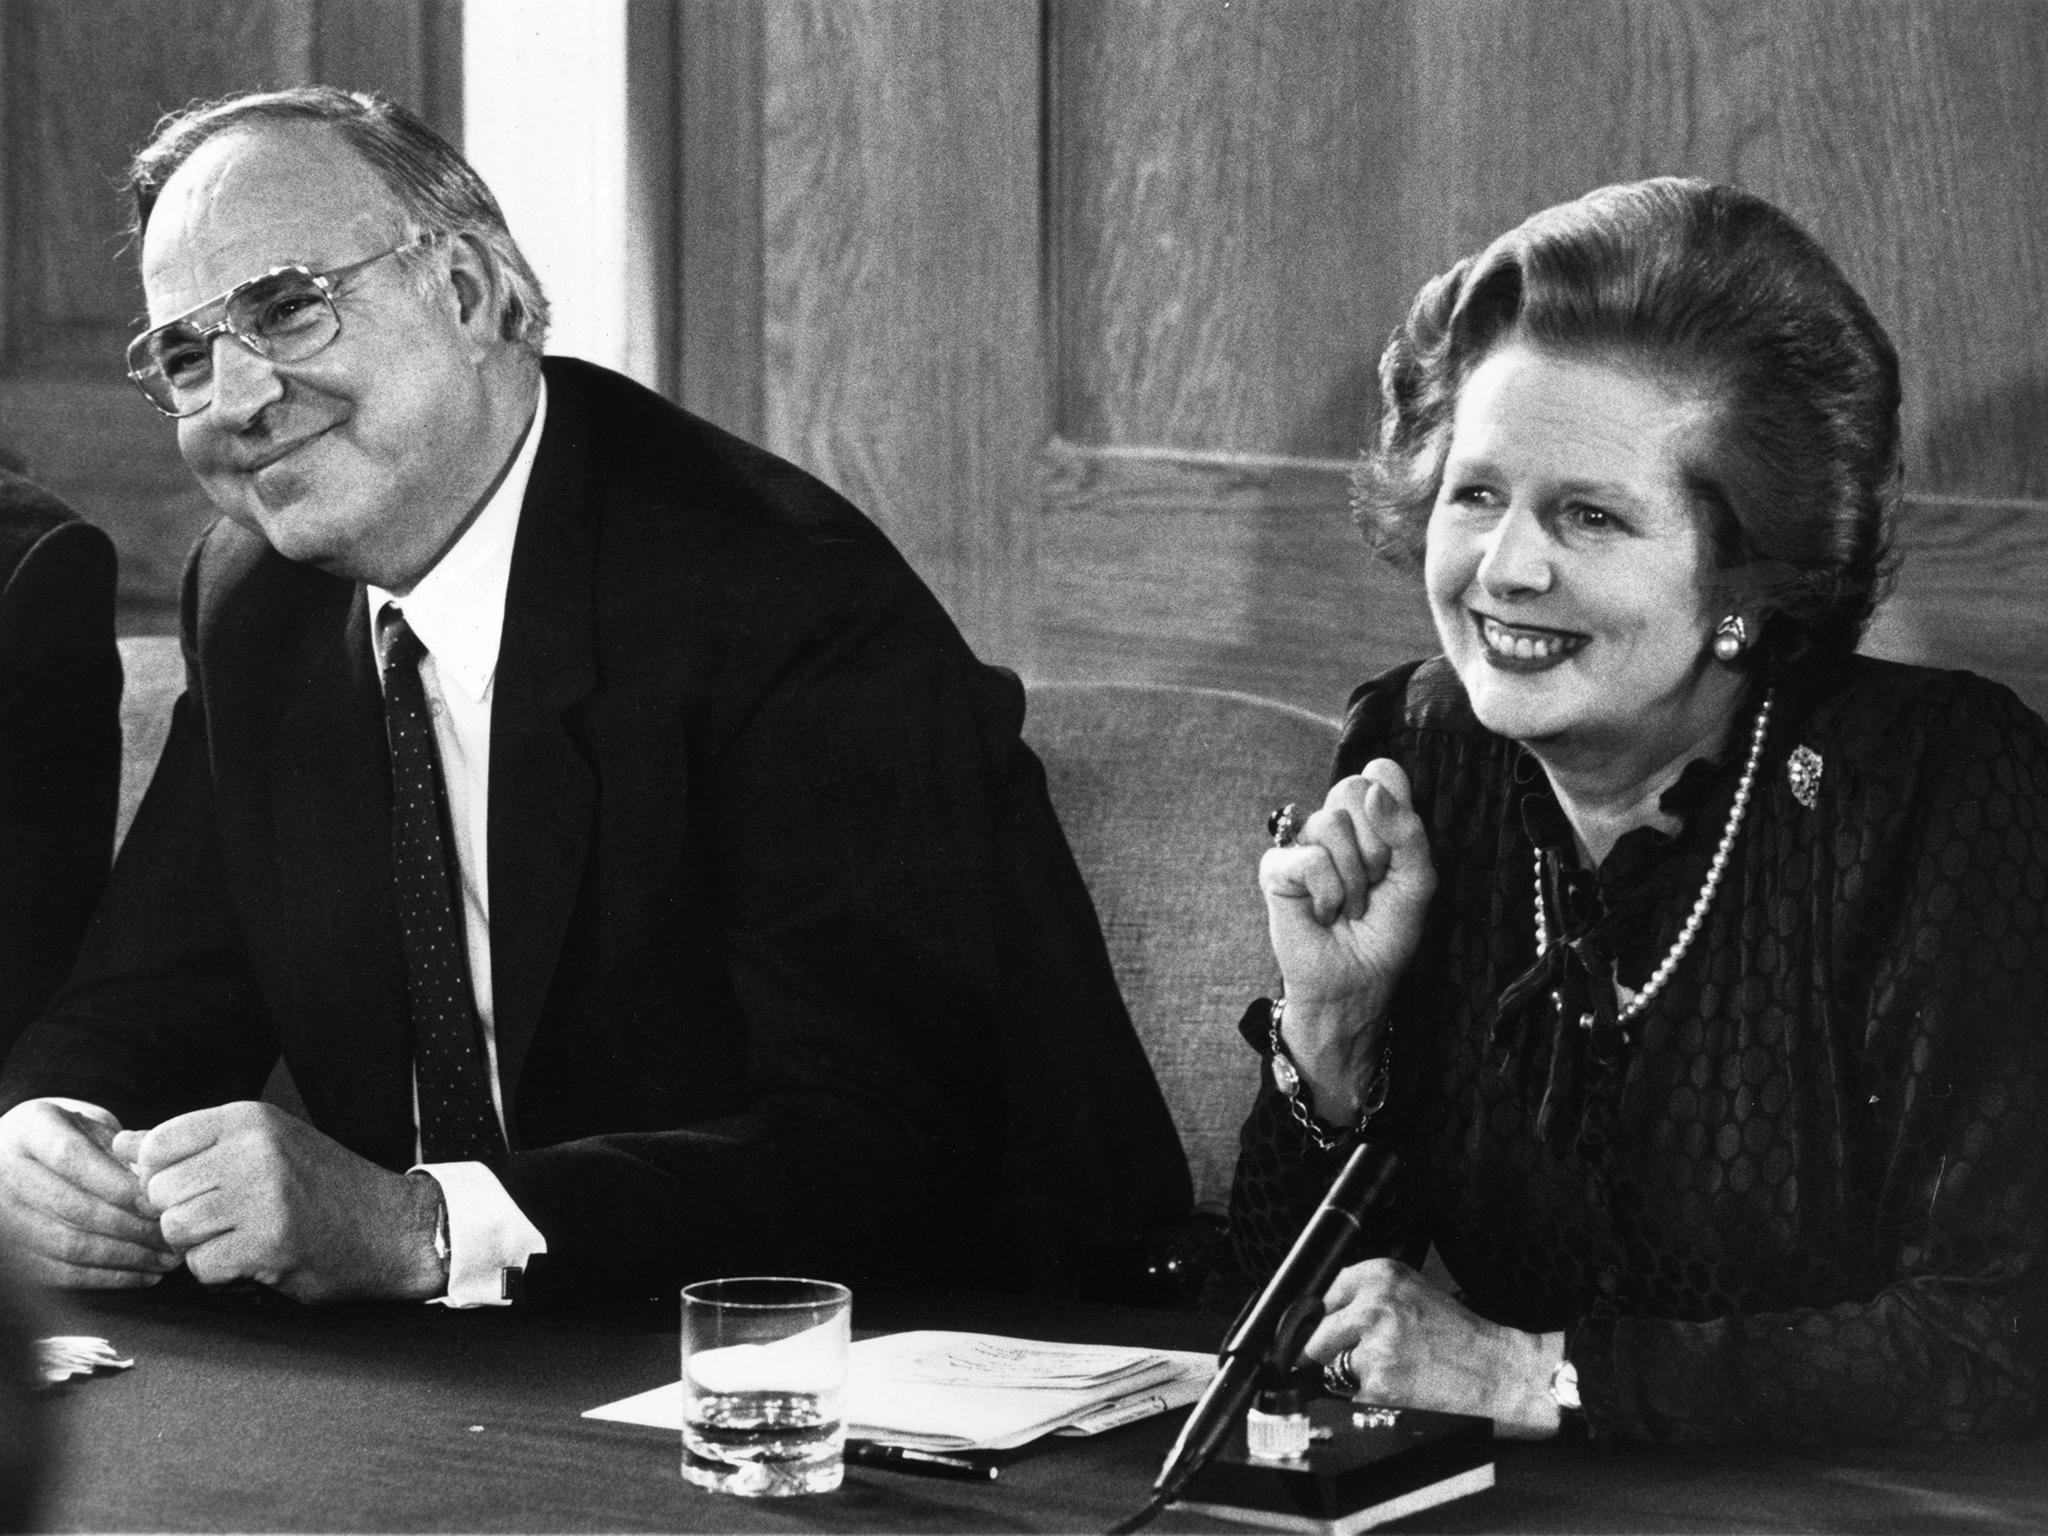 Tory grandees claim the spirit and zeal of the Iron Lady will see Britain through 'the challenges of this turbulent era'.